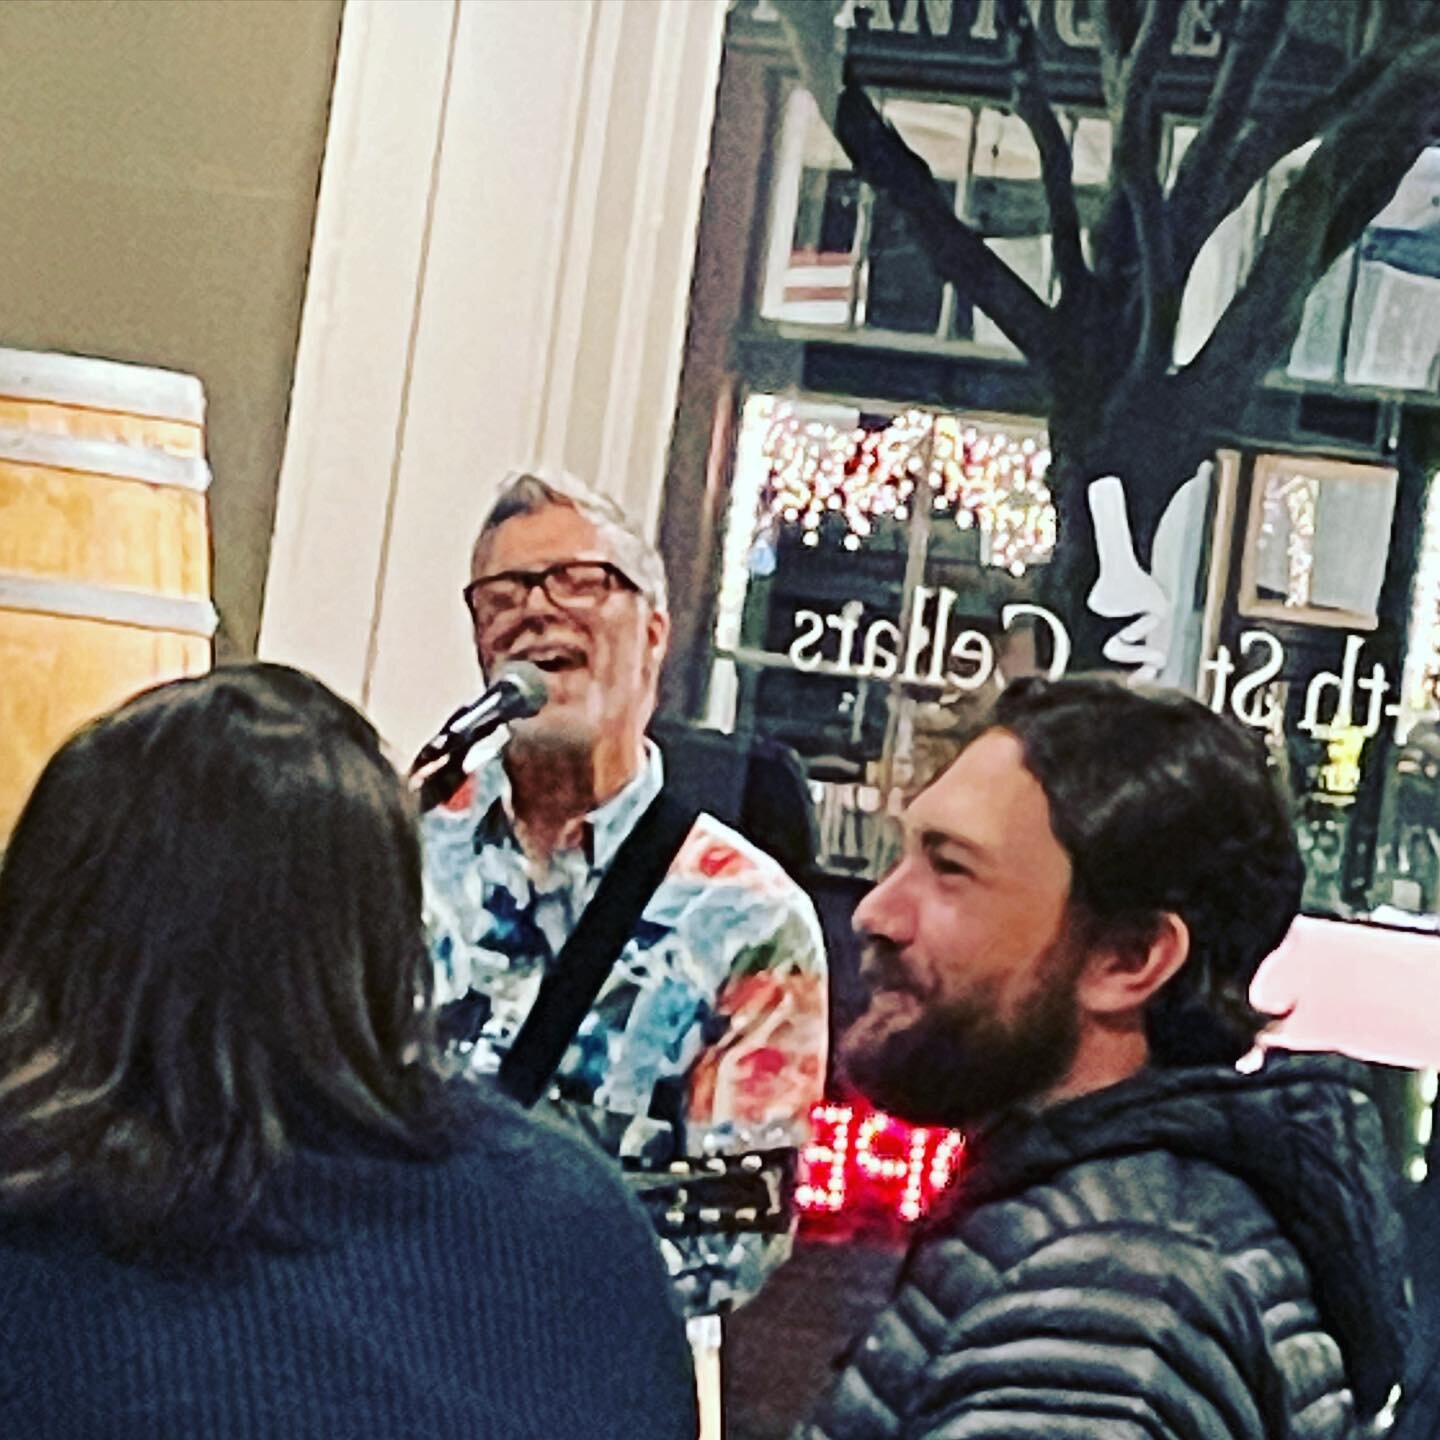 Here I am singing my guts out for a full house at 4th Street Cellars last night. Thanks to Kori and Jason for booking me. Let&rsquo;s do it again!